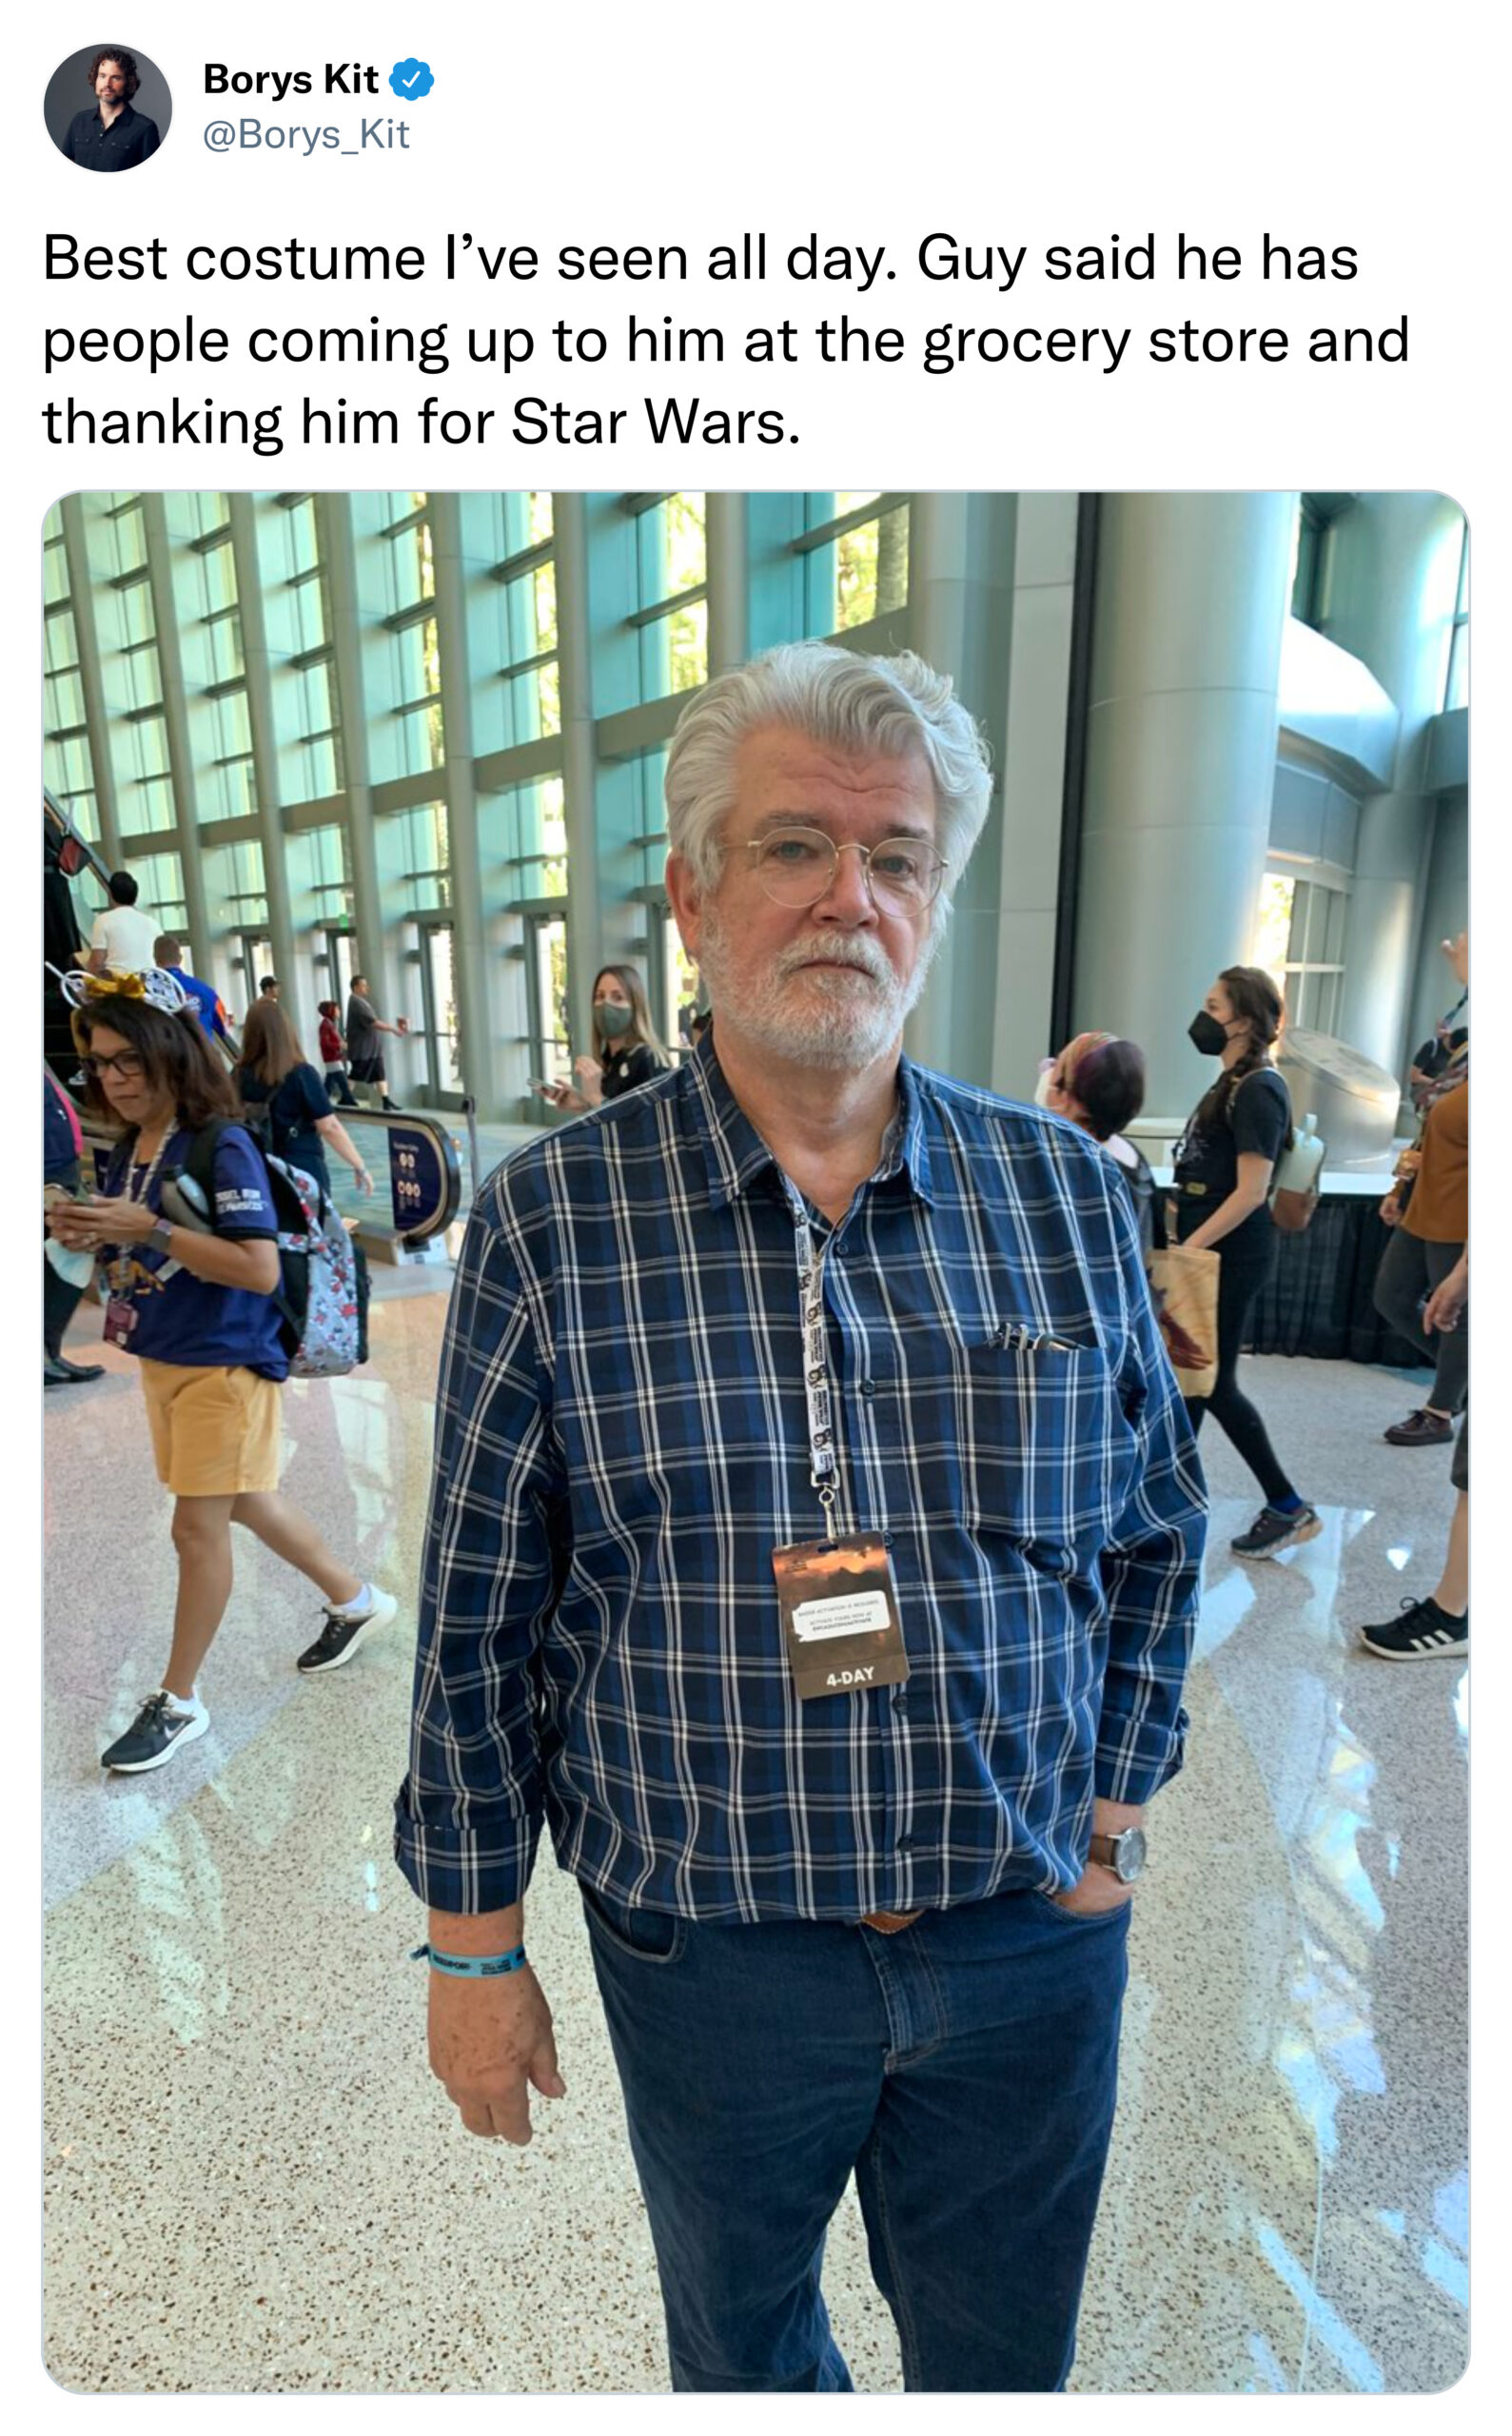 funny tweets  -  george lucas cosplay guy - Borys Kit Kit Best costume I've seen all day. Guy said he has people coming up to him at the grocery store and thanking him for Star Wars.